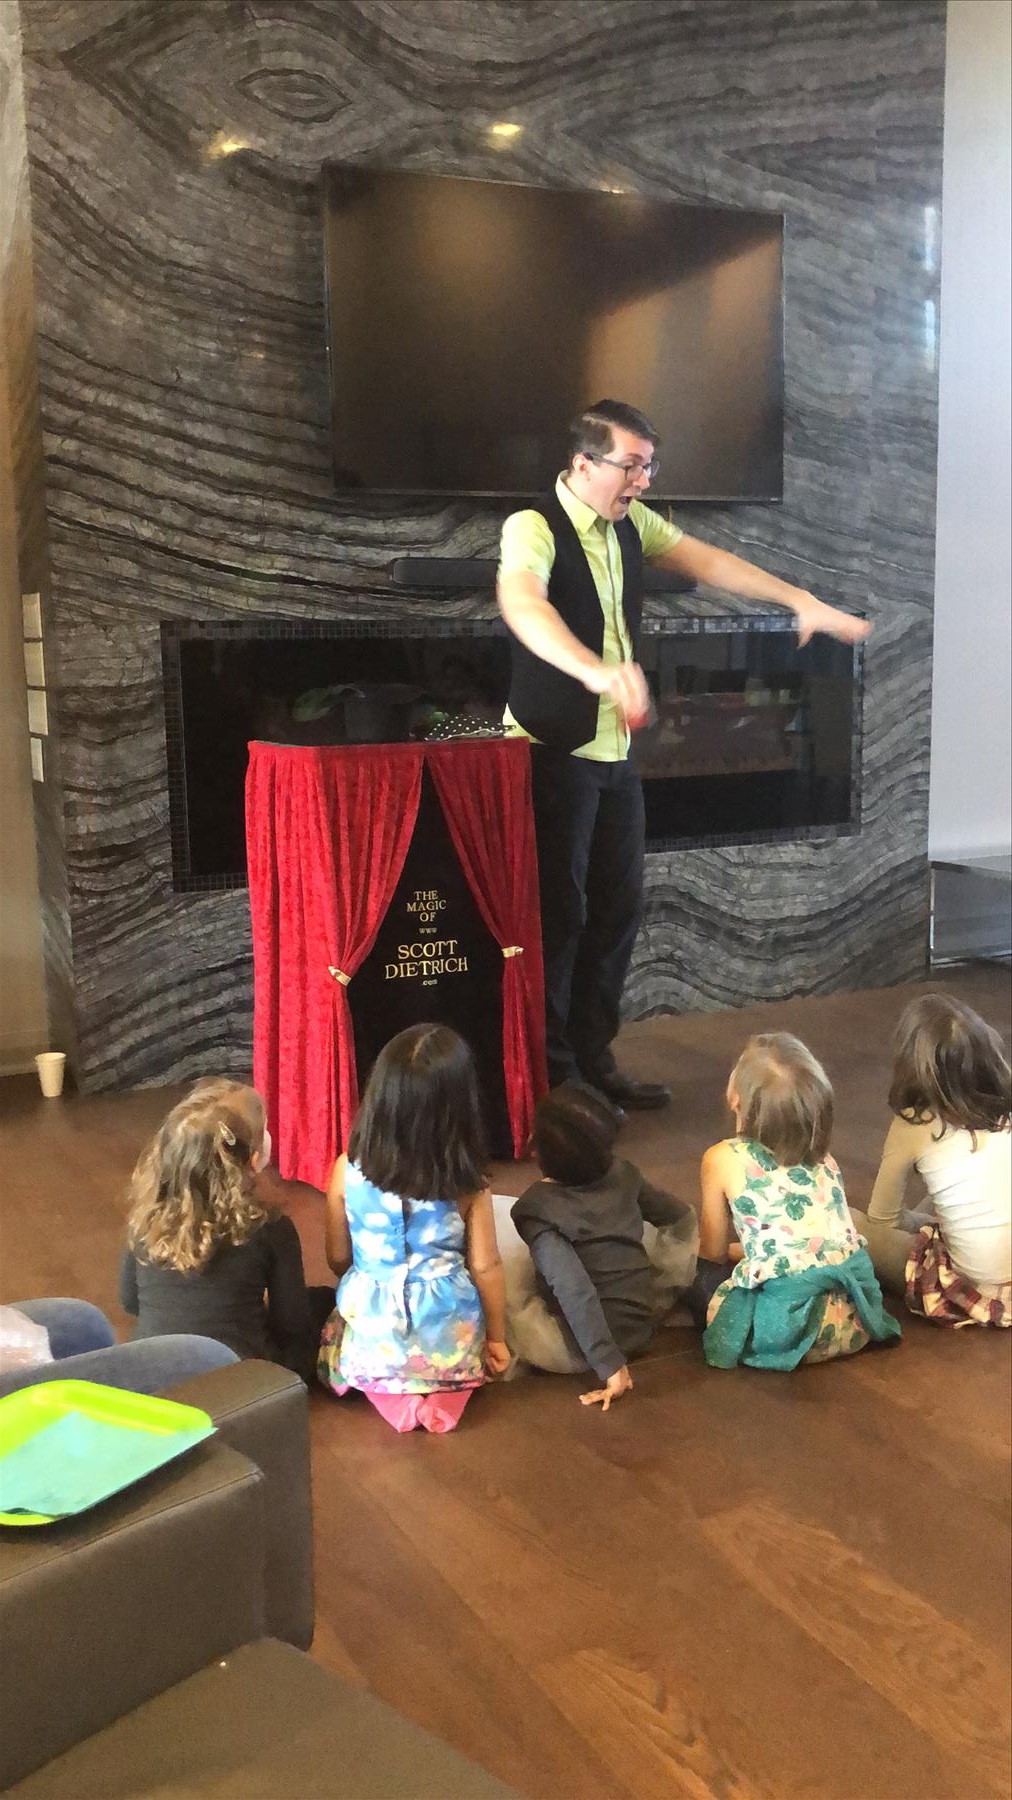 Amazing magic show that kids and adults loved.